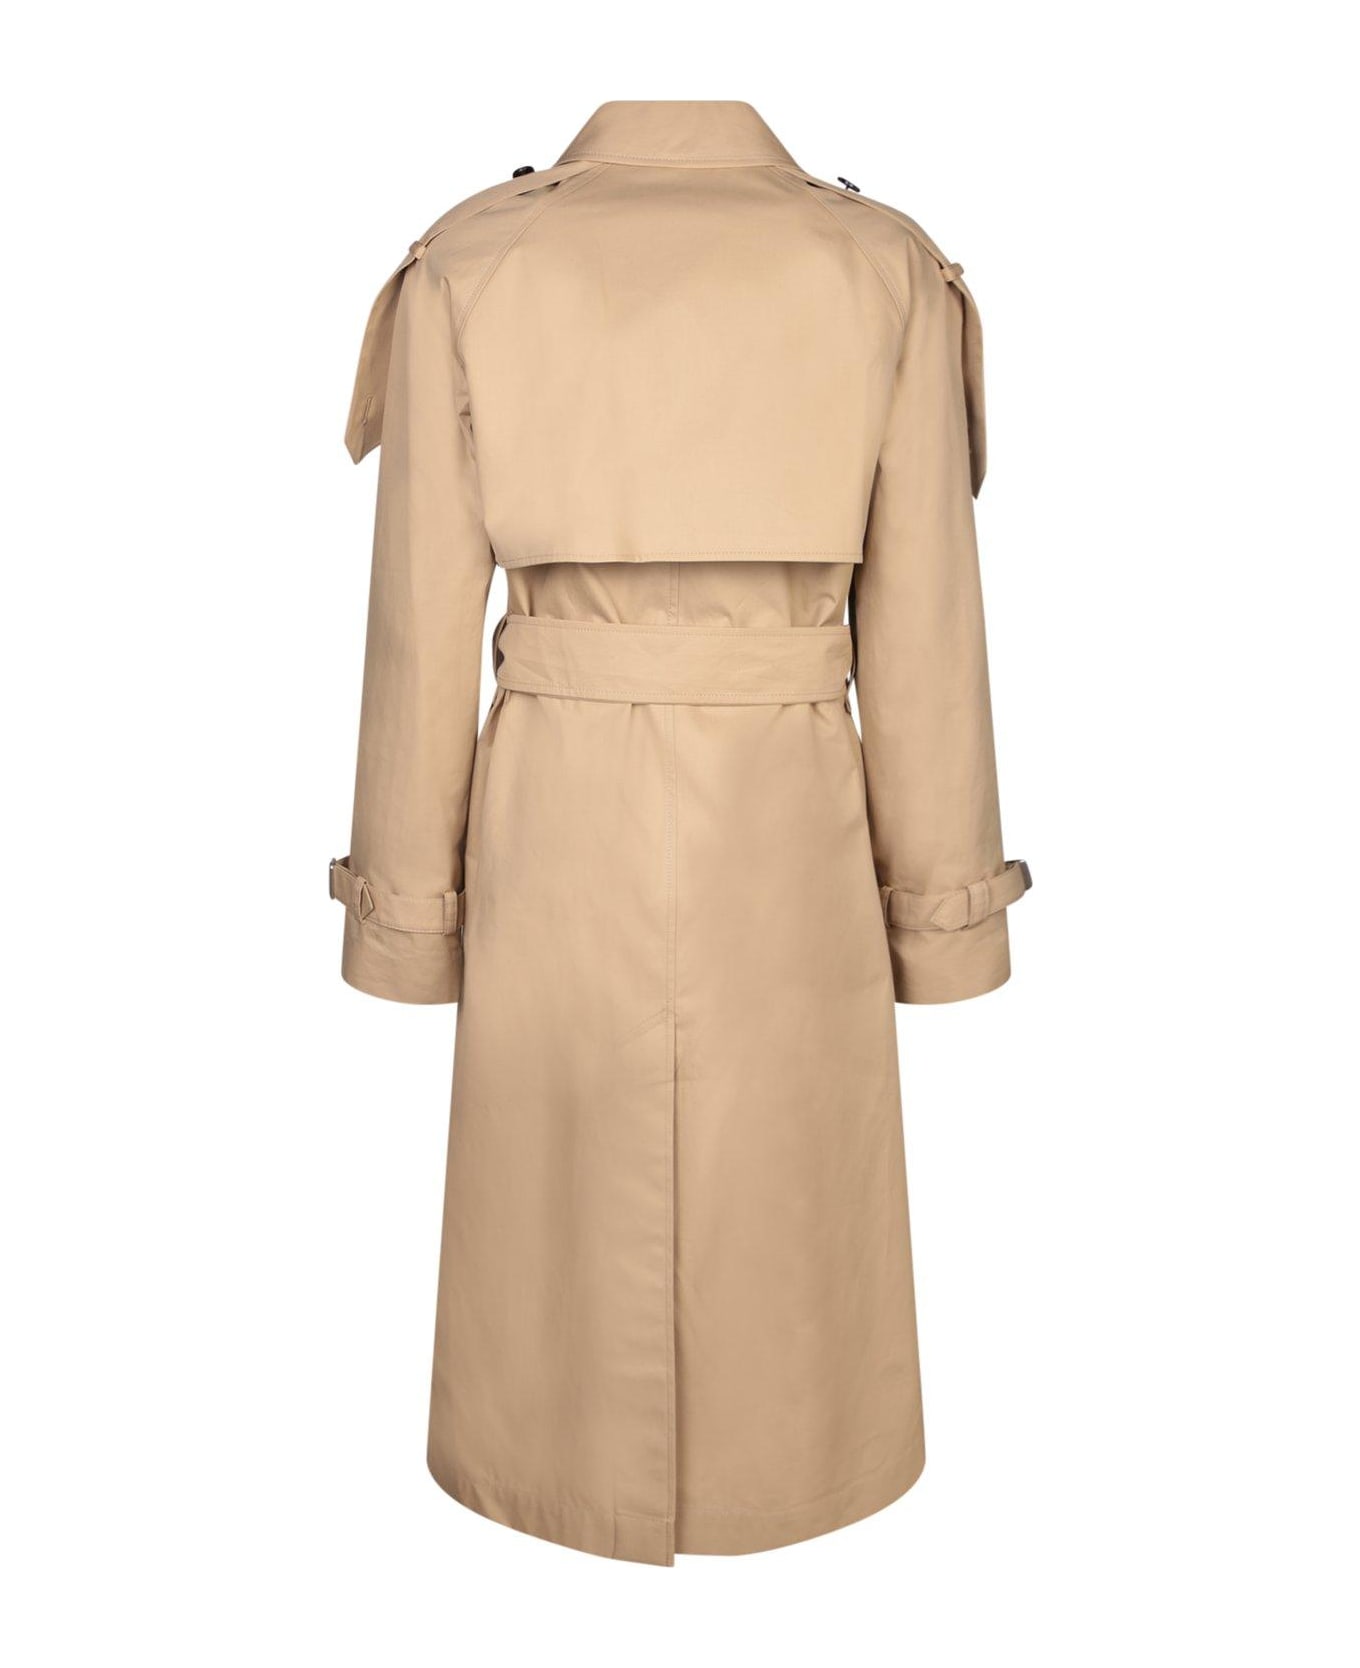 Burberry Gabardine Double-breasted Belted Trench Coat - Beige レインコート